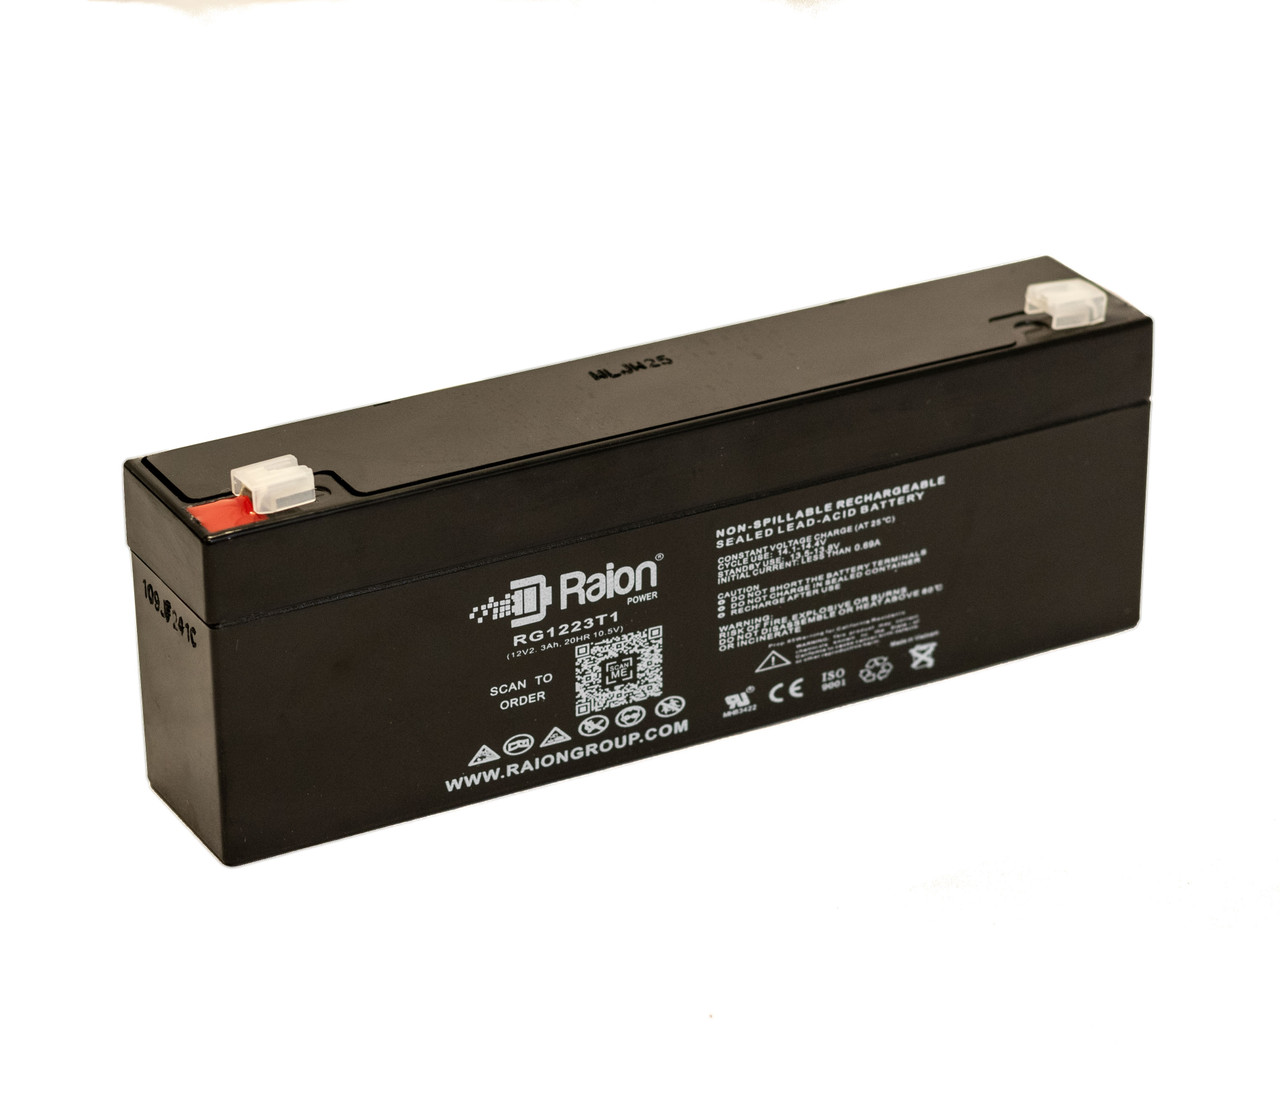 Raion Power RG1223T1 Replacement Battery for Alpha House AH 12-2.2